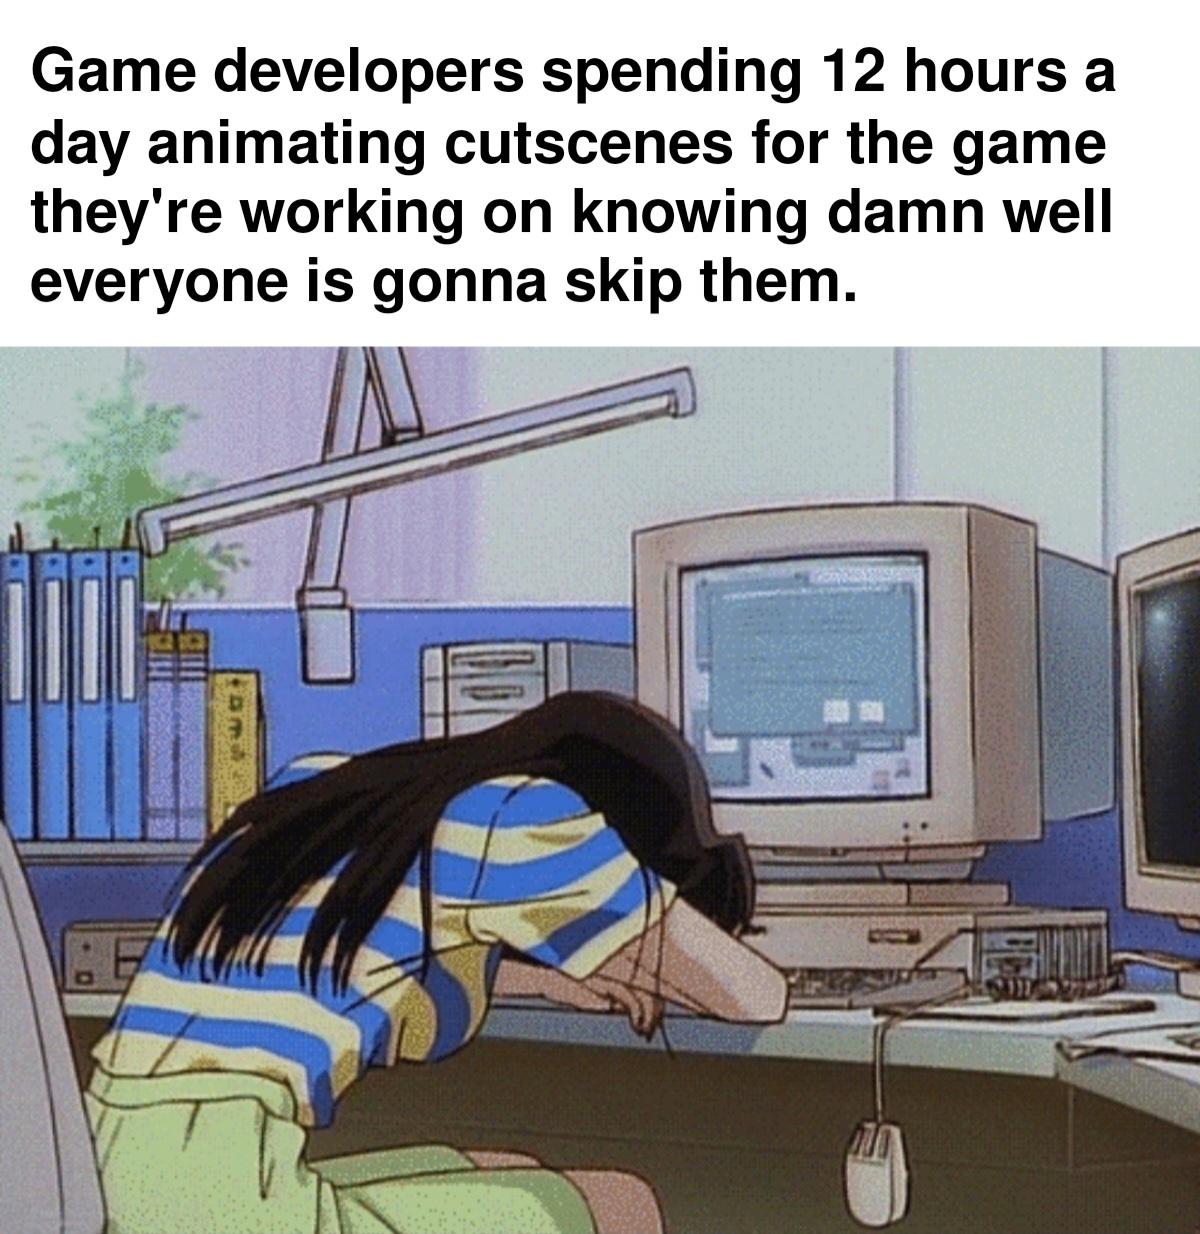 dank memes - aesthetic anime 90s gif - Game developers spending 12 hours a day animating cutscenes for the game they're working on knowing damn well everyone is gonna skip them. 1604